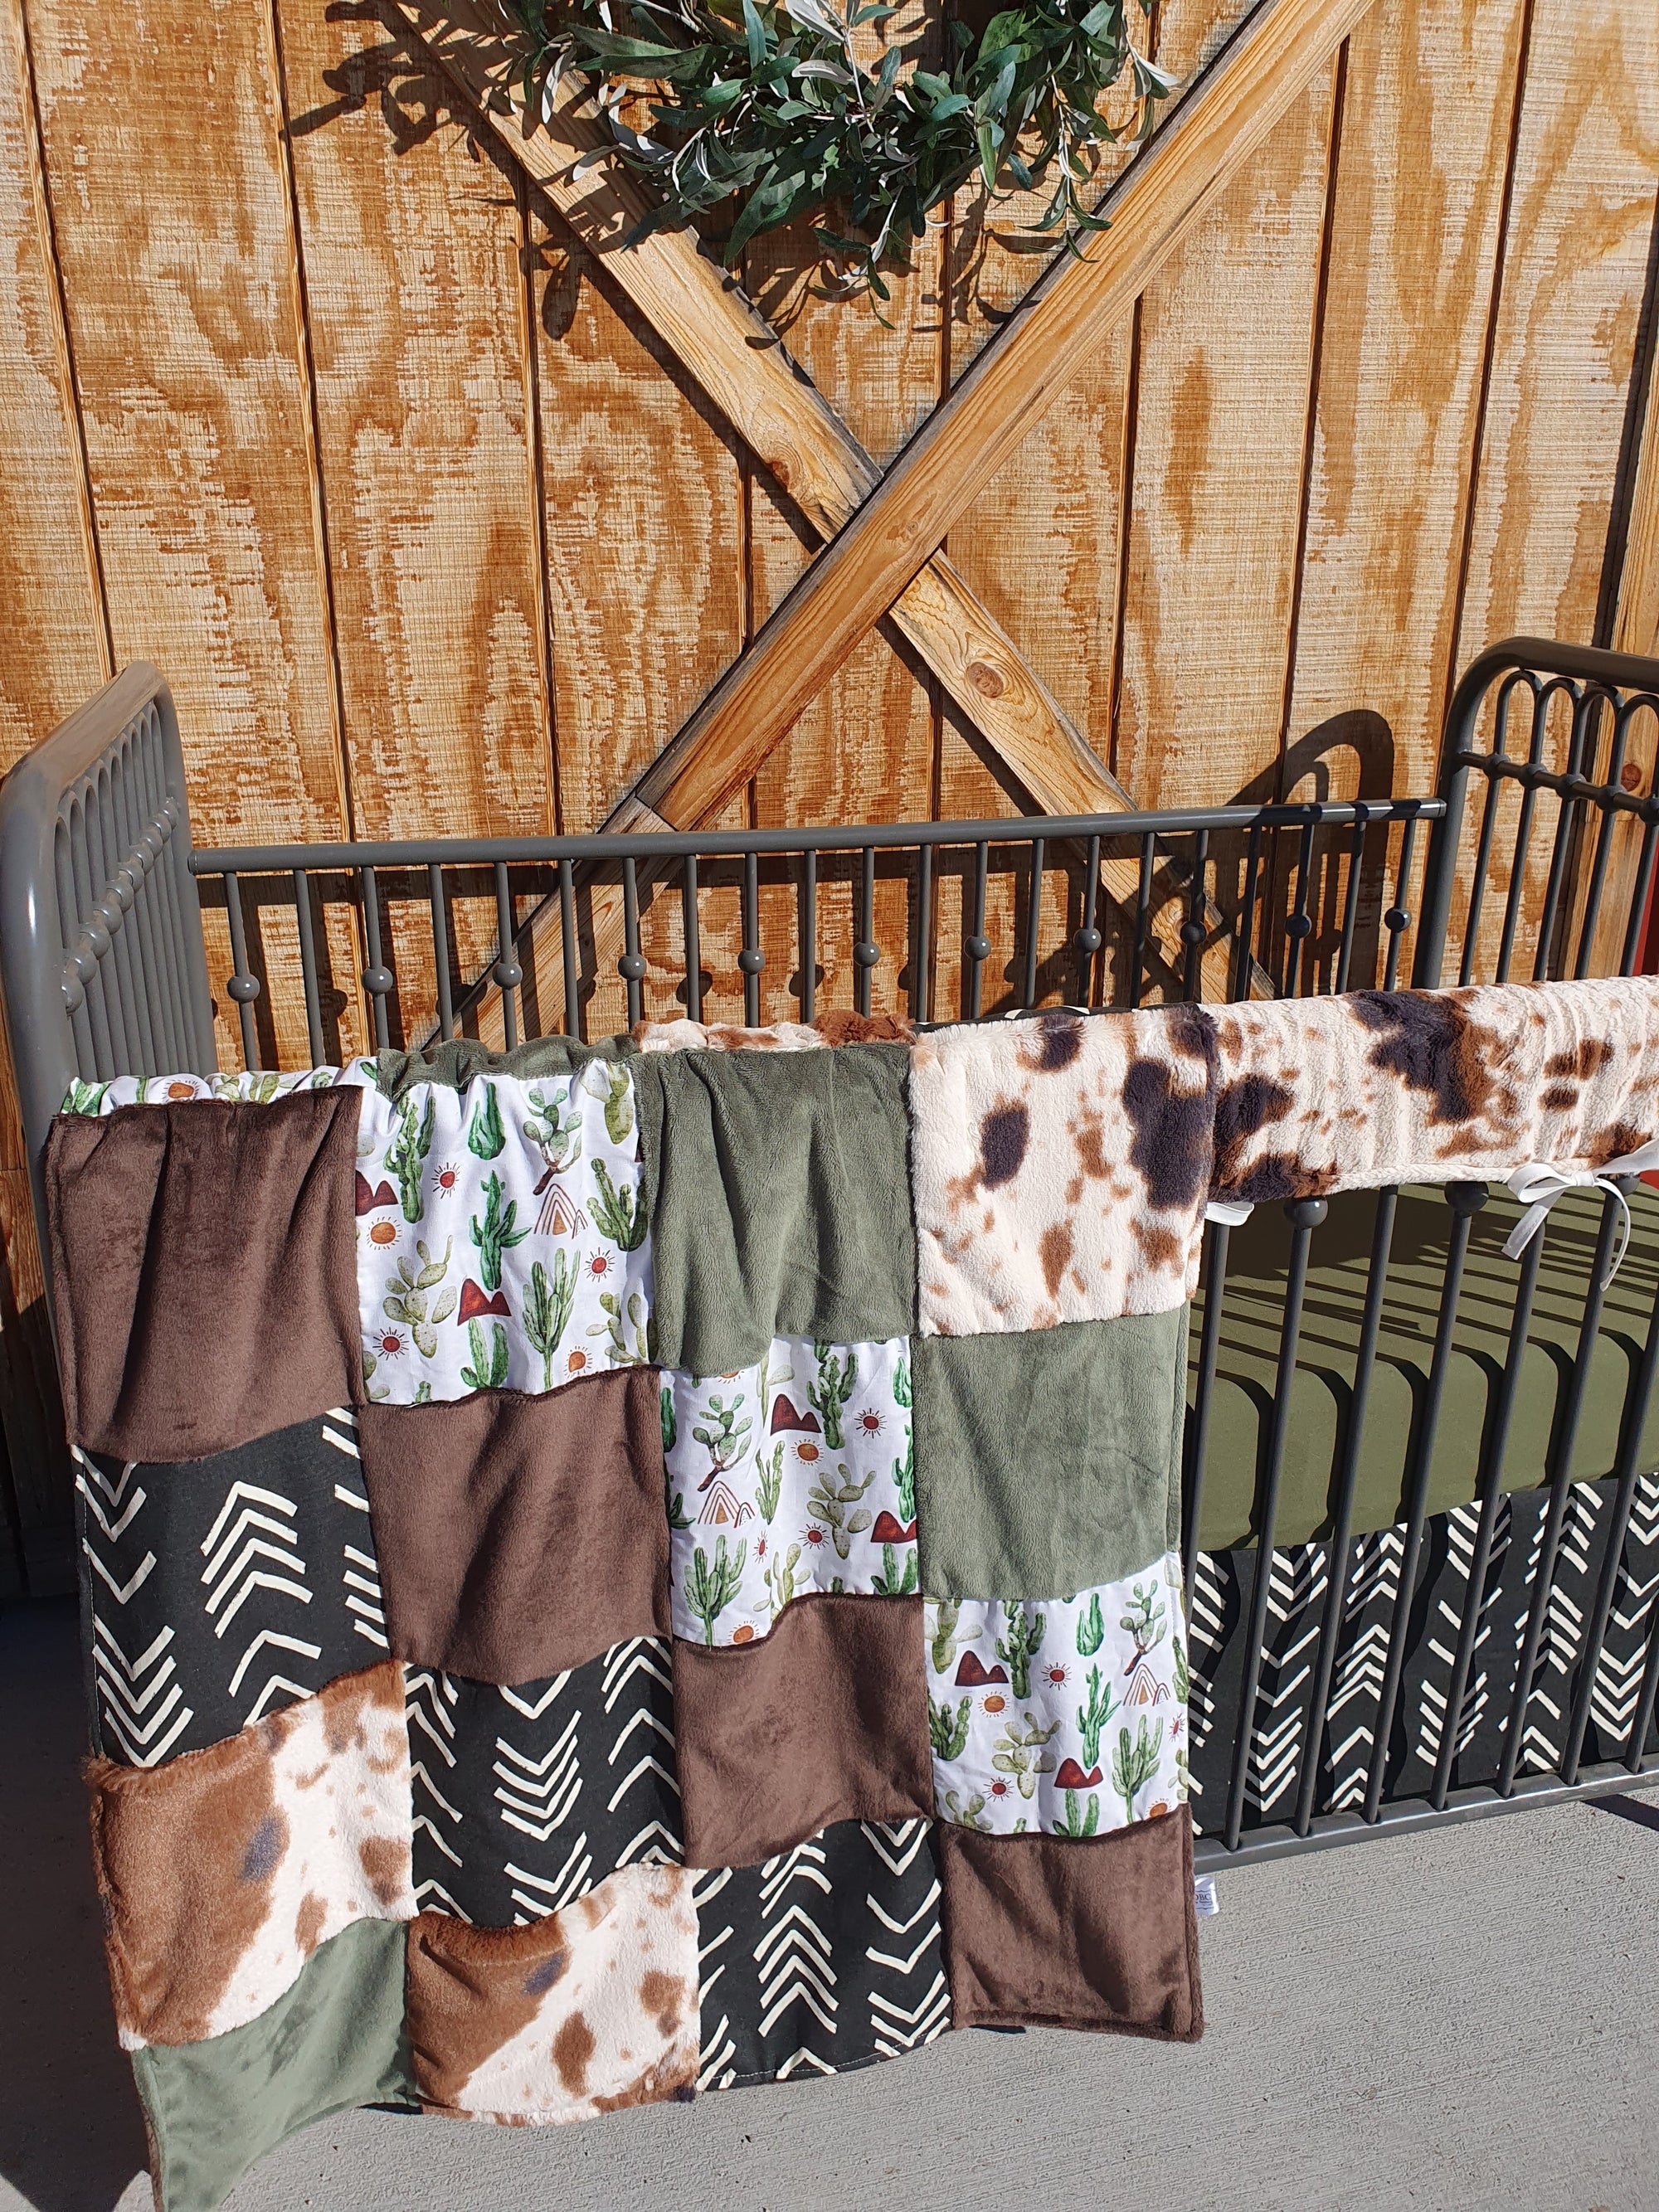 New Release Boy Crib Bedding- Cactus Mountains and Cow Minky Western Baby & Toddler  Bedding Collection - DBC Baby Bedding Co 